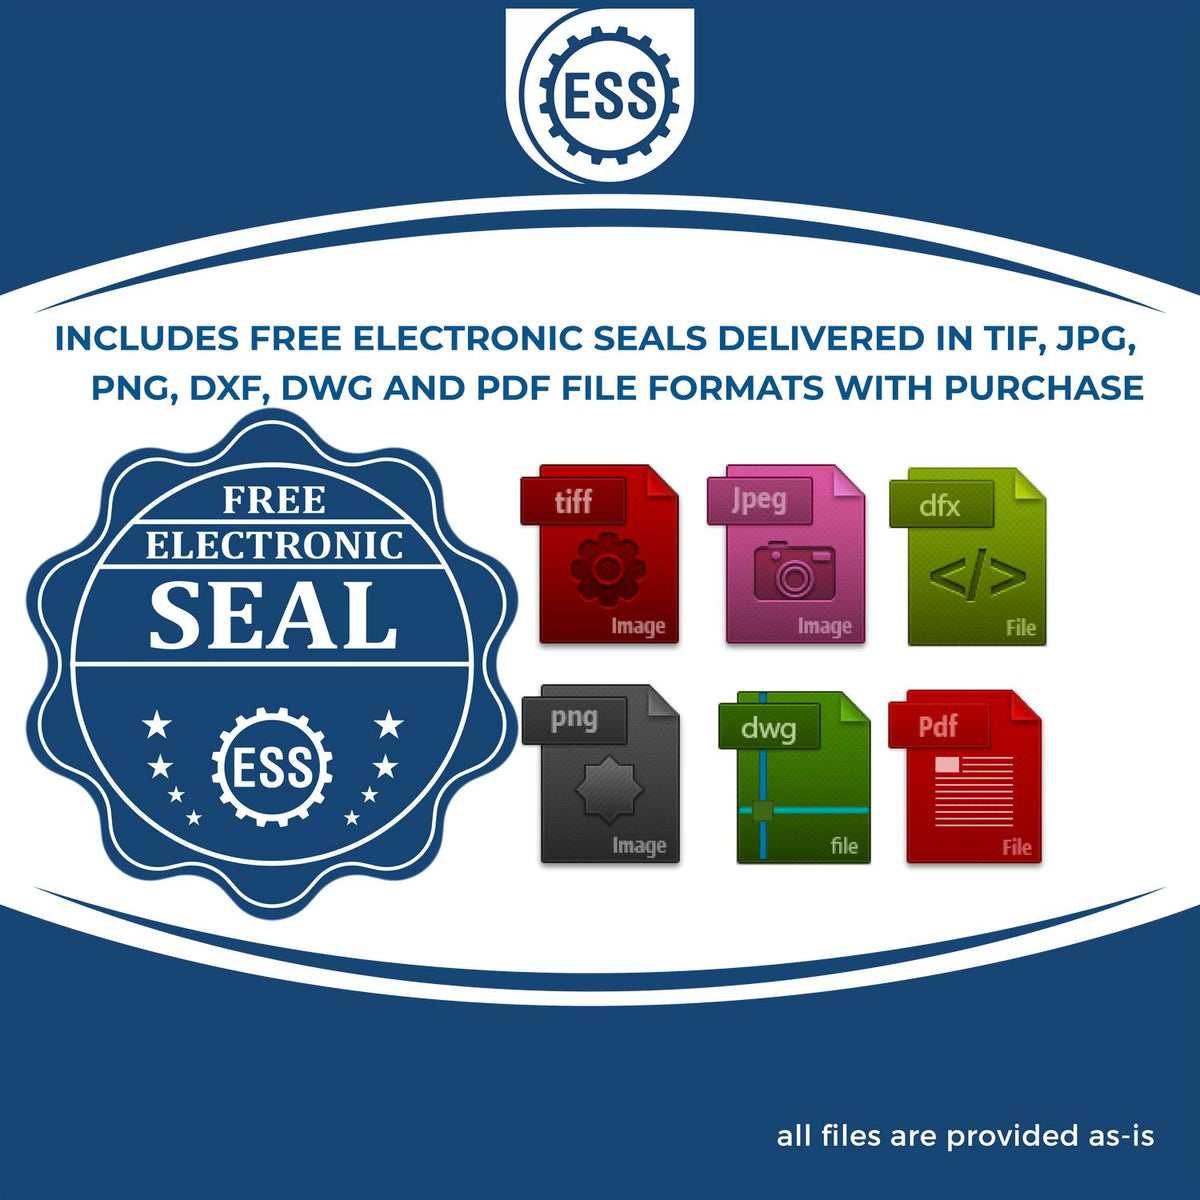 An infographic for the free electronic seal for the Illinois Desk Architect Embossing Seal illustrating the different file type icons such as DXF, DWG, TIF, JPG and PNG.